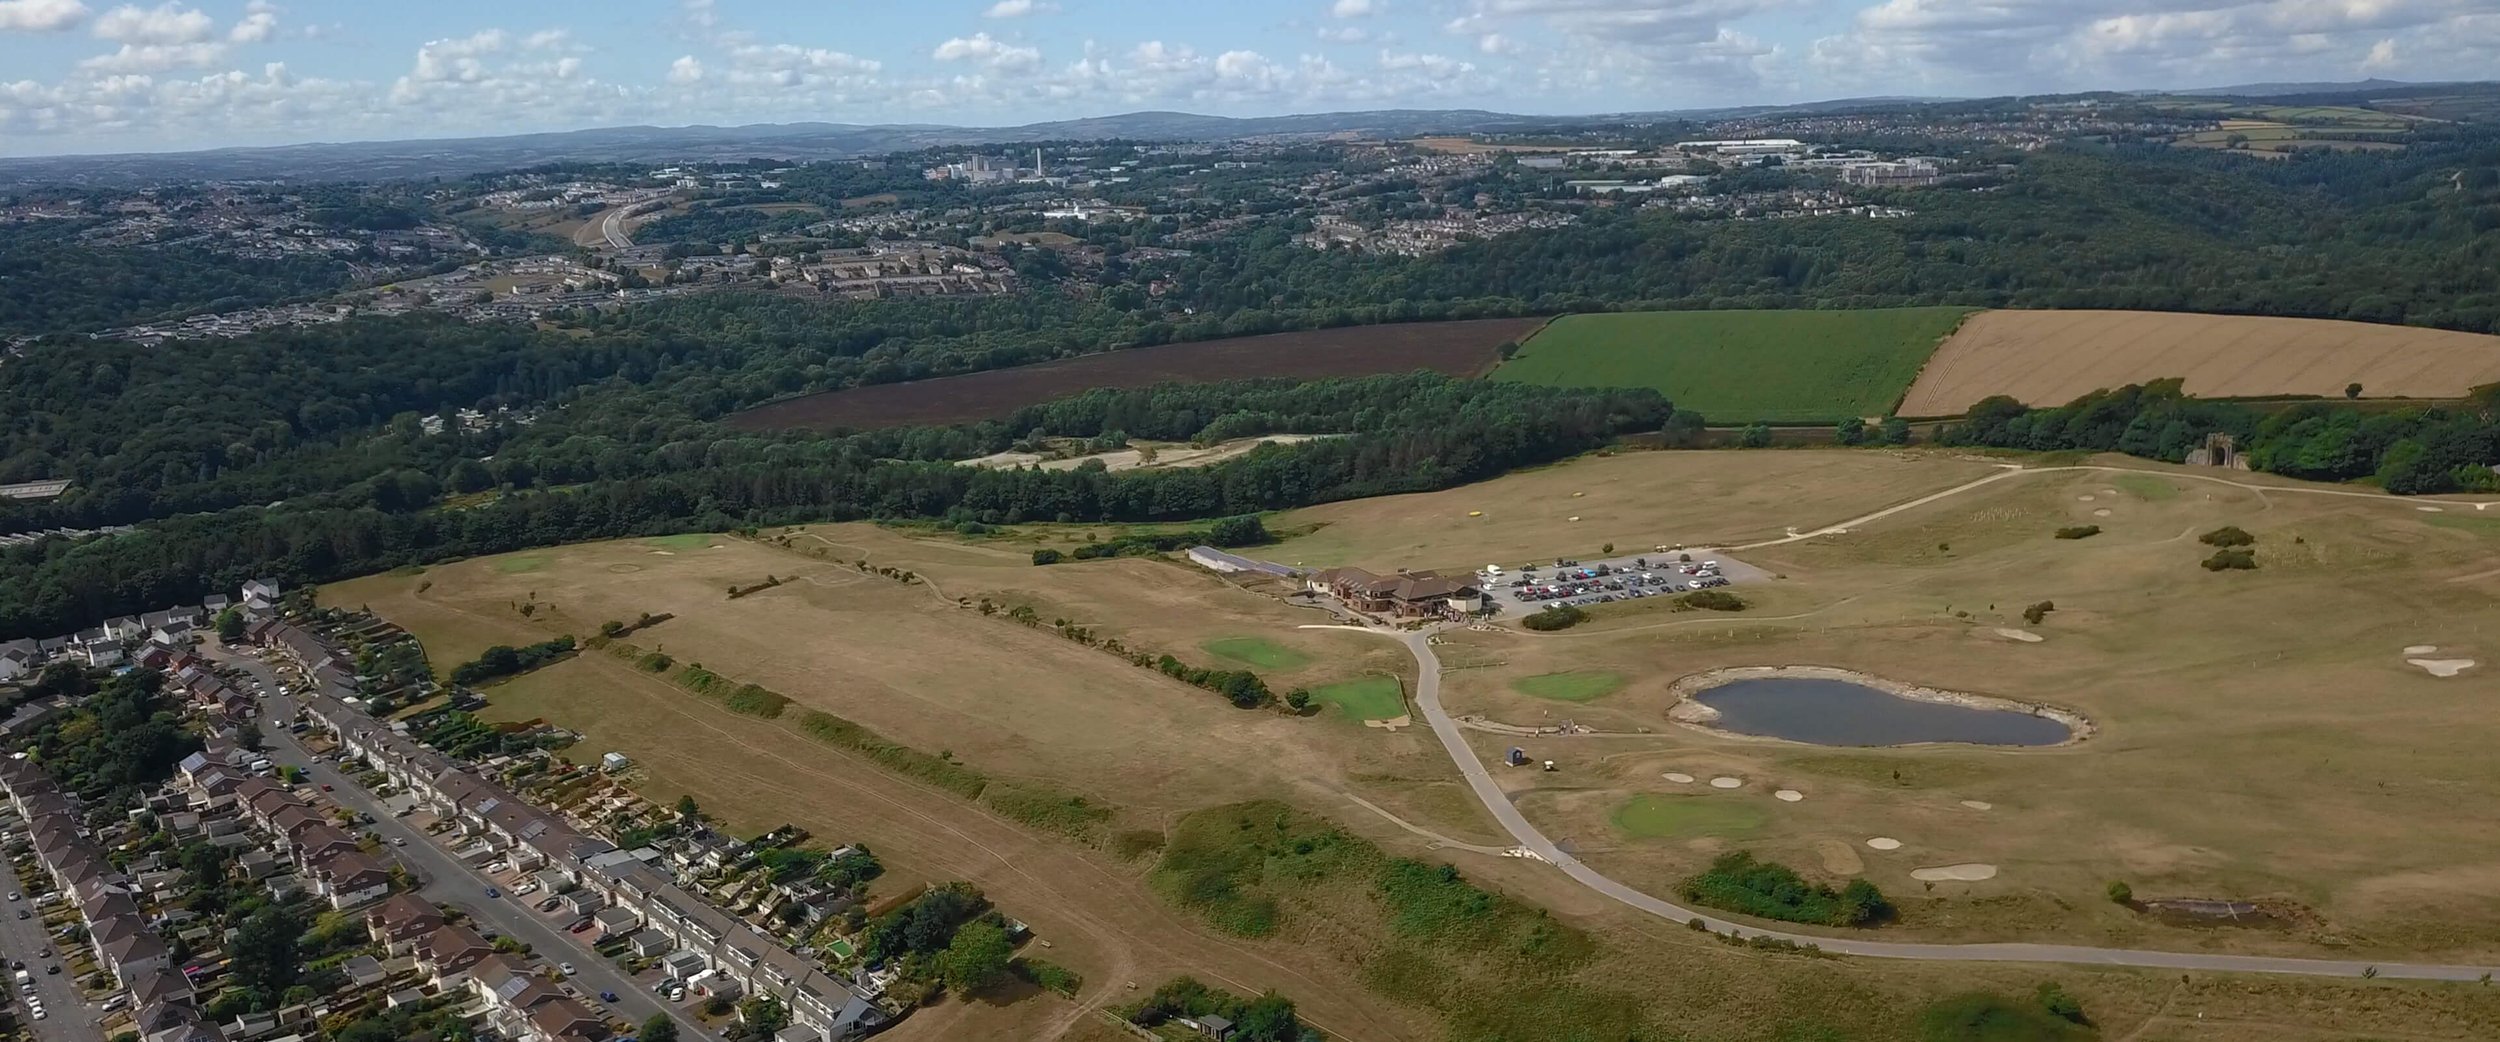 Aerial drone shot of Boringdon Golf Club and the surrounding plymouth landscape